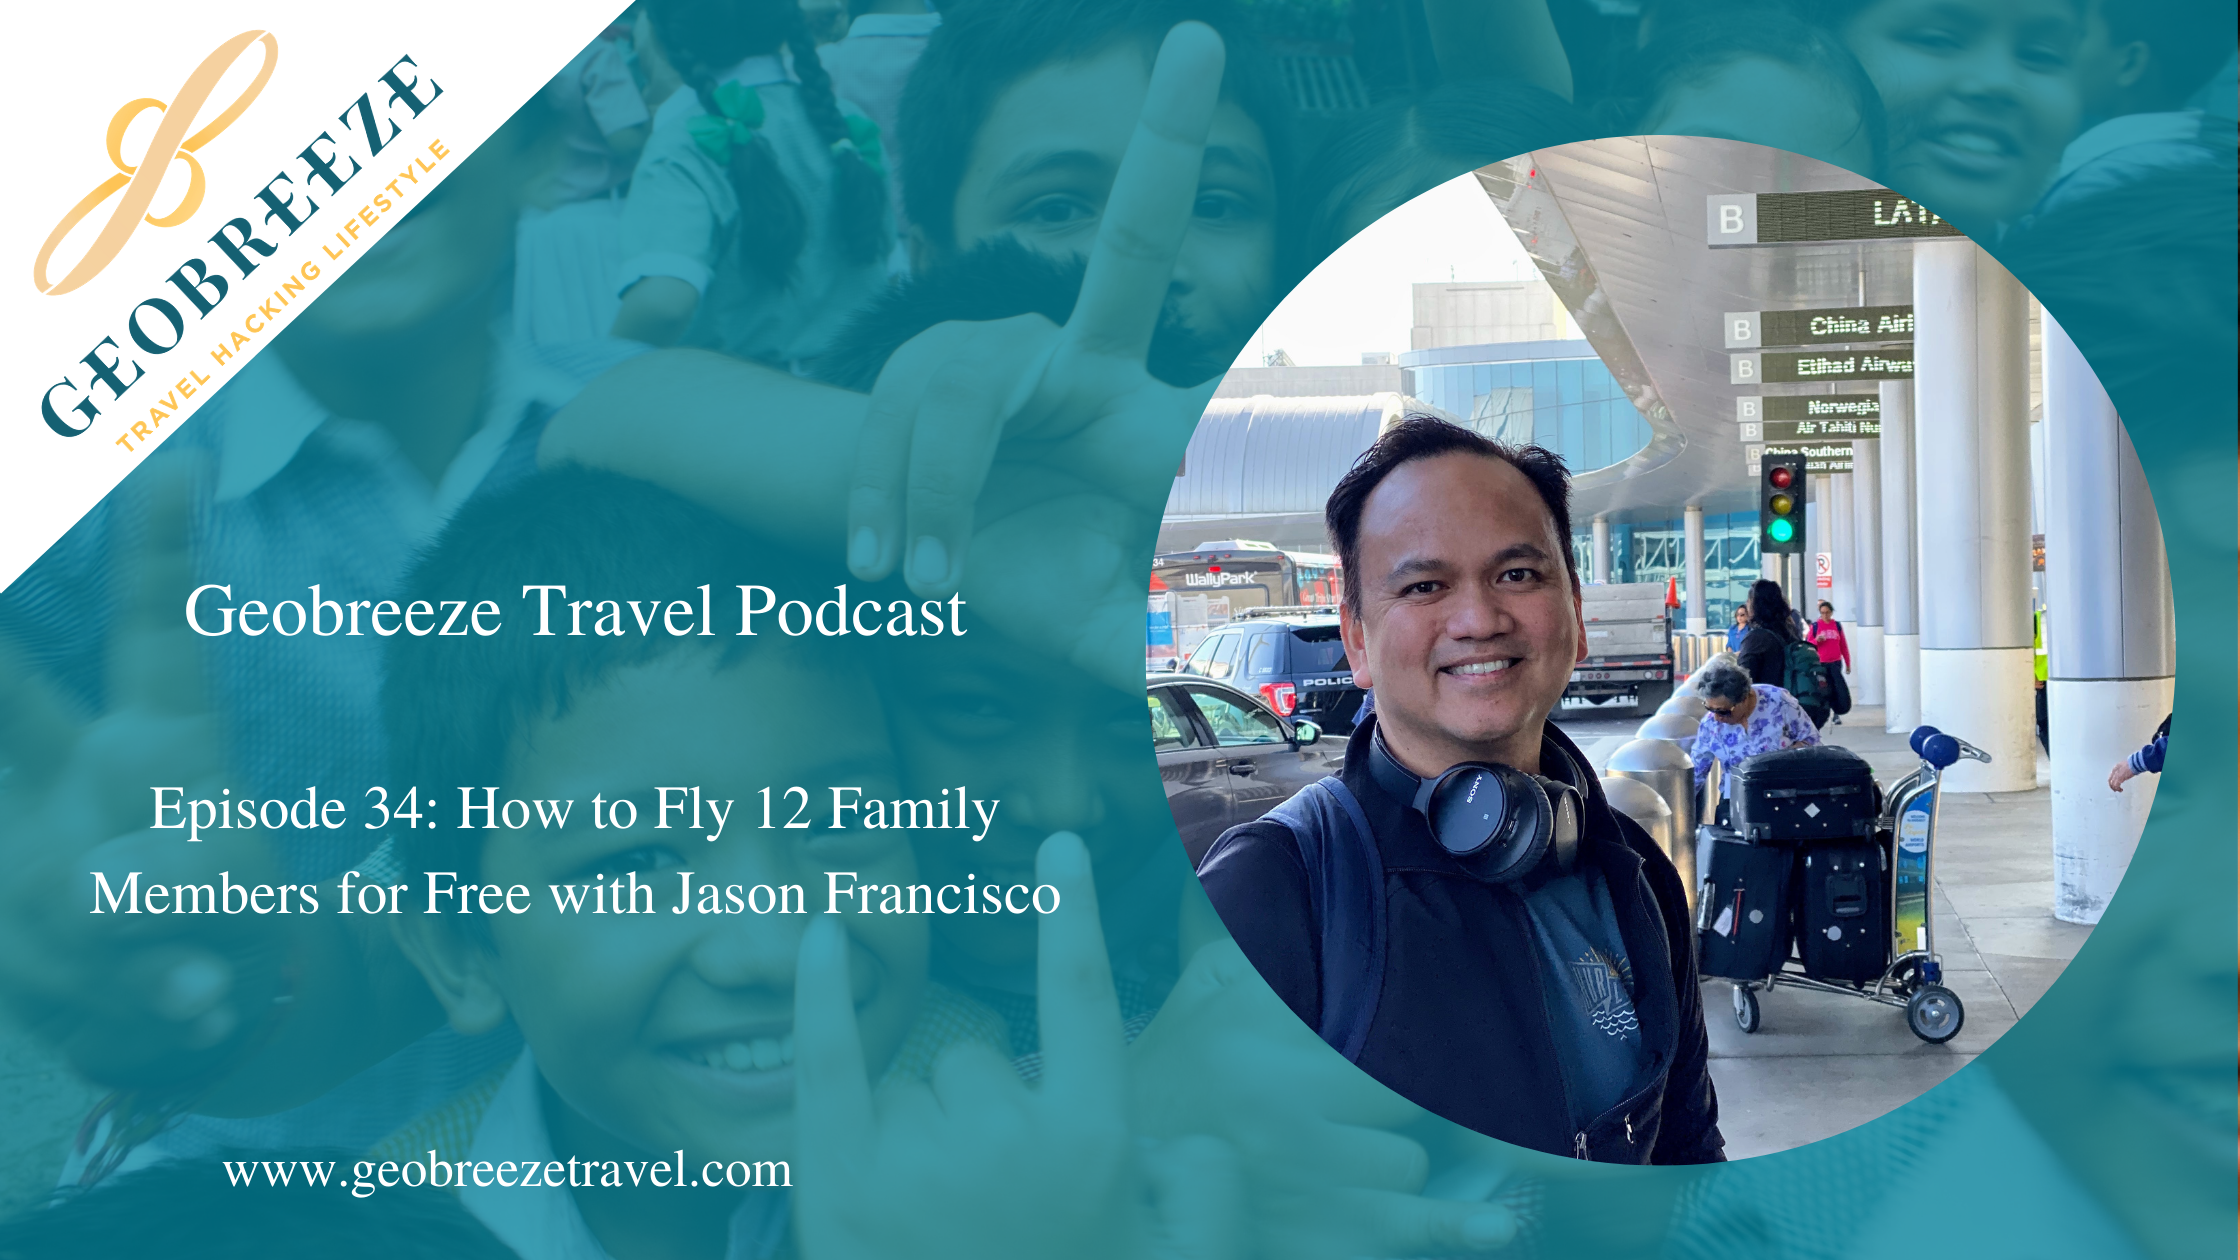 Episode 35: How to Fly 12 Family Members for Free with Jason Francisco